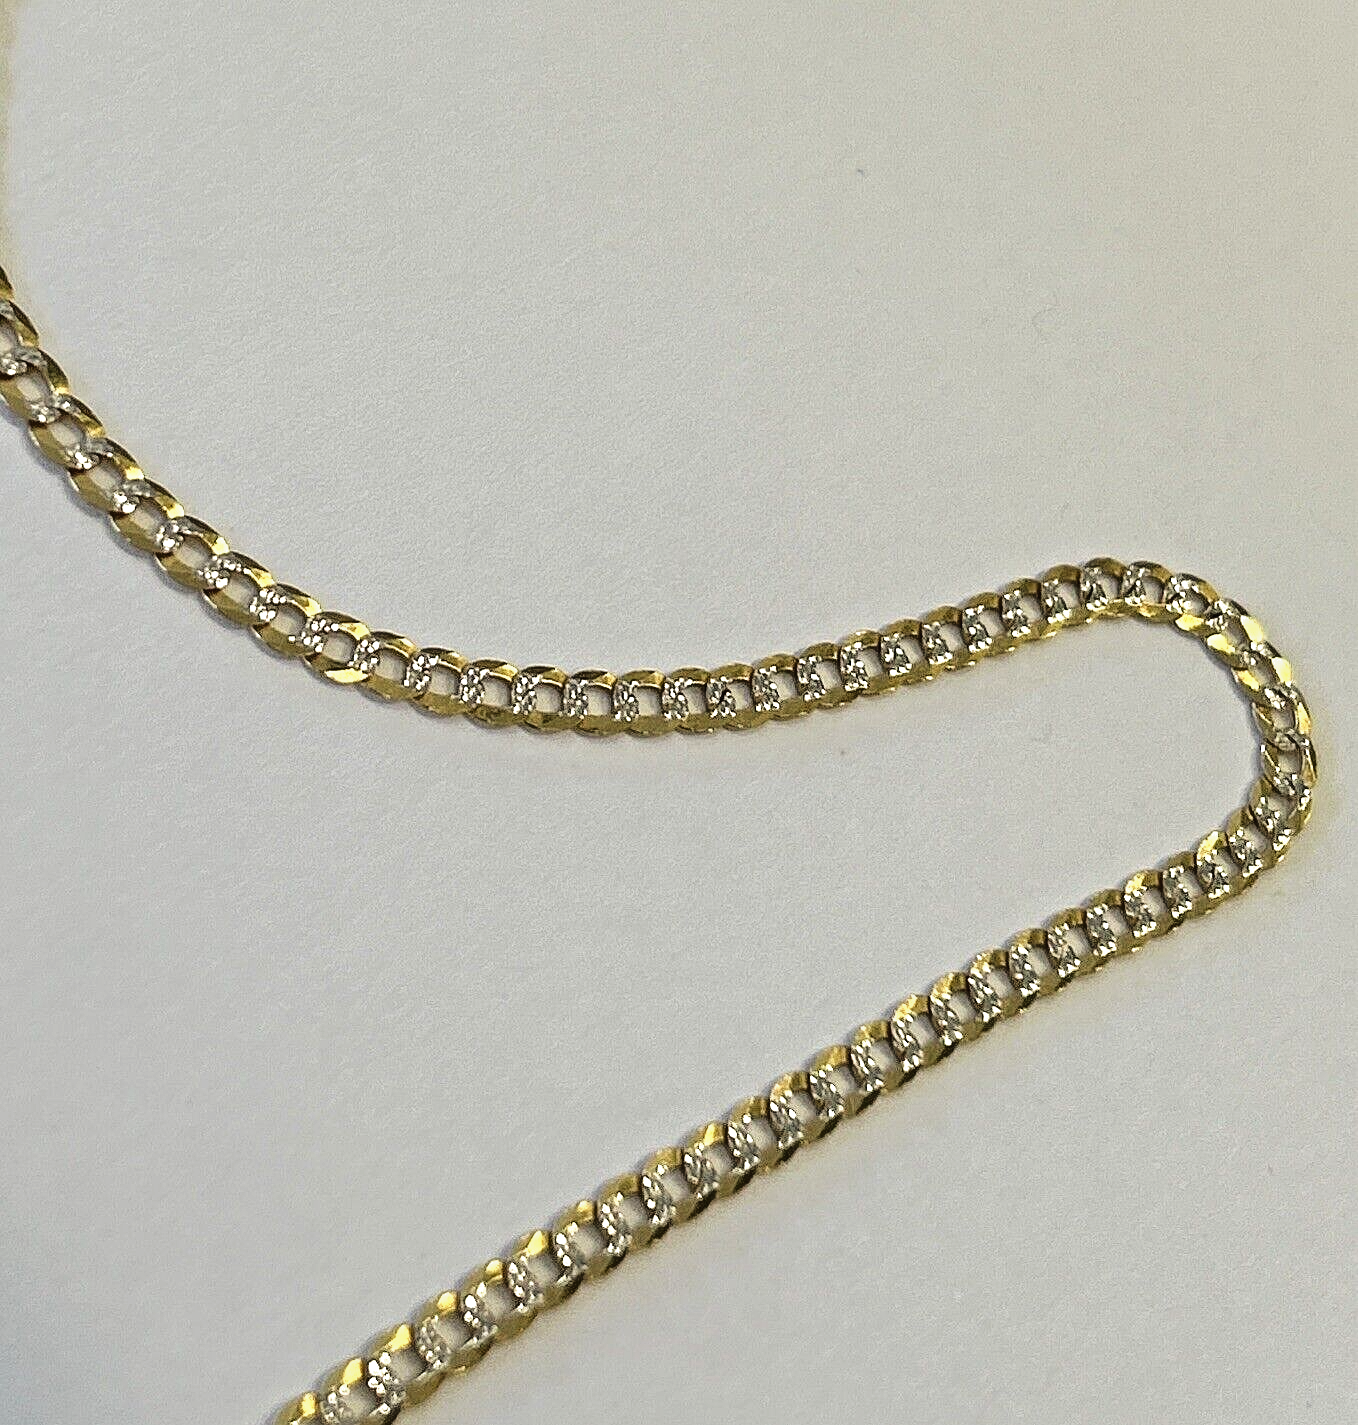 14k Gold w White Curb Link Chain 20" Inch 7.3 grams 3.6mm